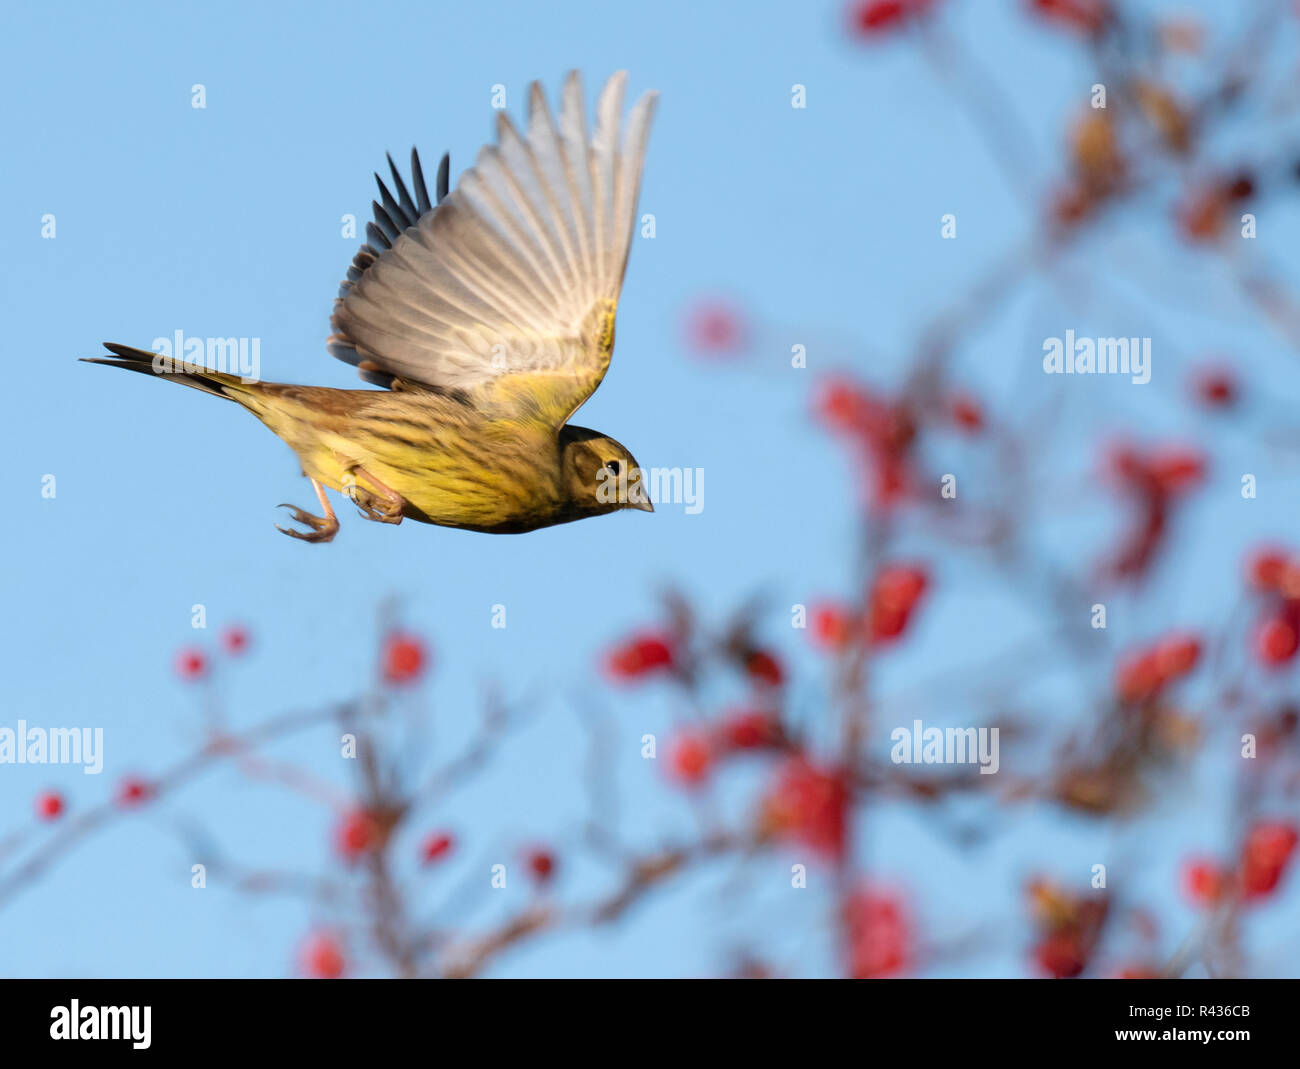 A Yellowhammer (Emberiza citrinella) in flight amongst red Hawthorn berries, Norfolk Stock Photo